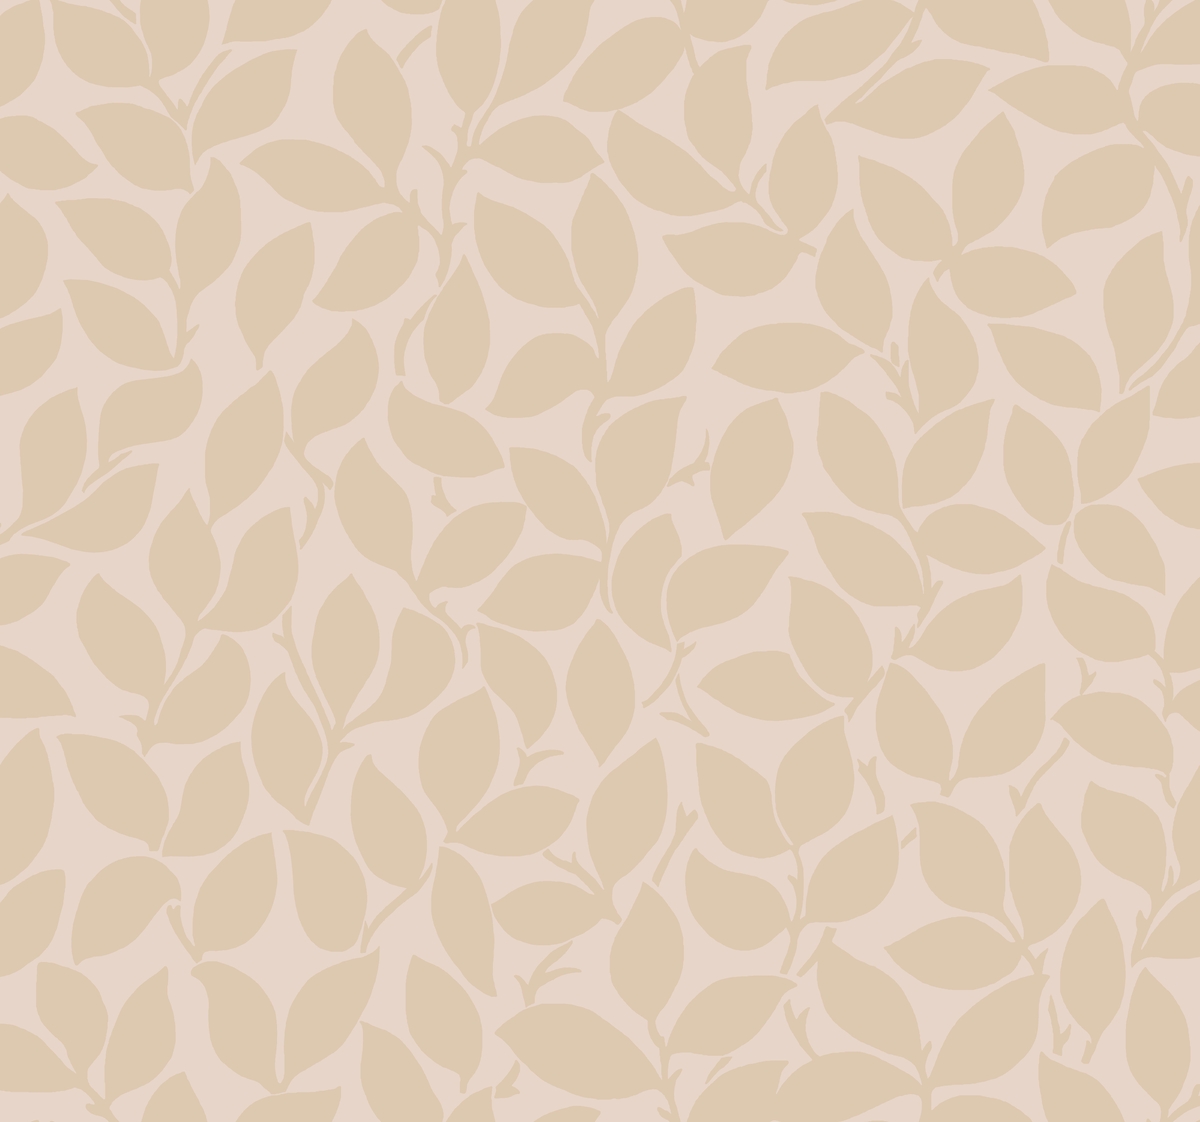 Leaf and Vine Wallpaper - Blush |Wallpaper And Borders |The Mural Store